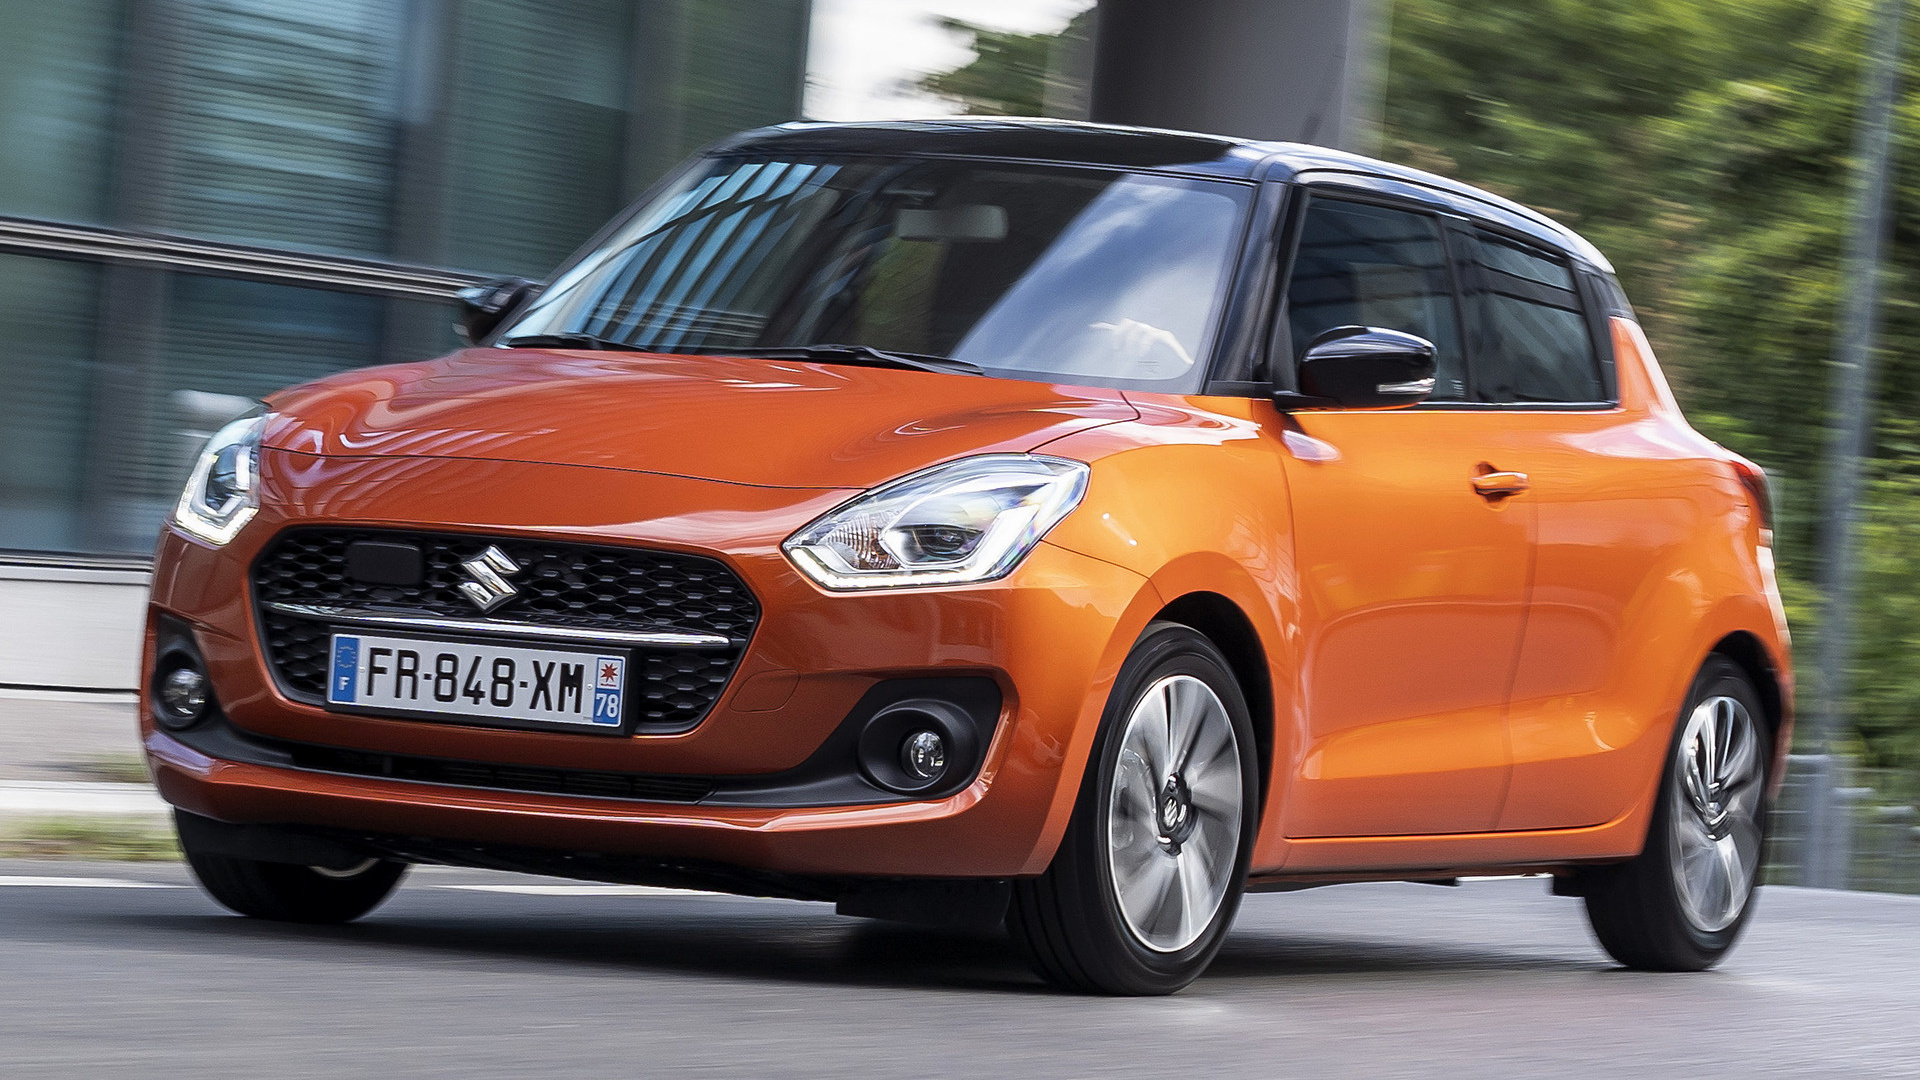 2020 Suzuki Swift Hybrid - Wallpapers and HD Images | Car Pixel